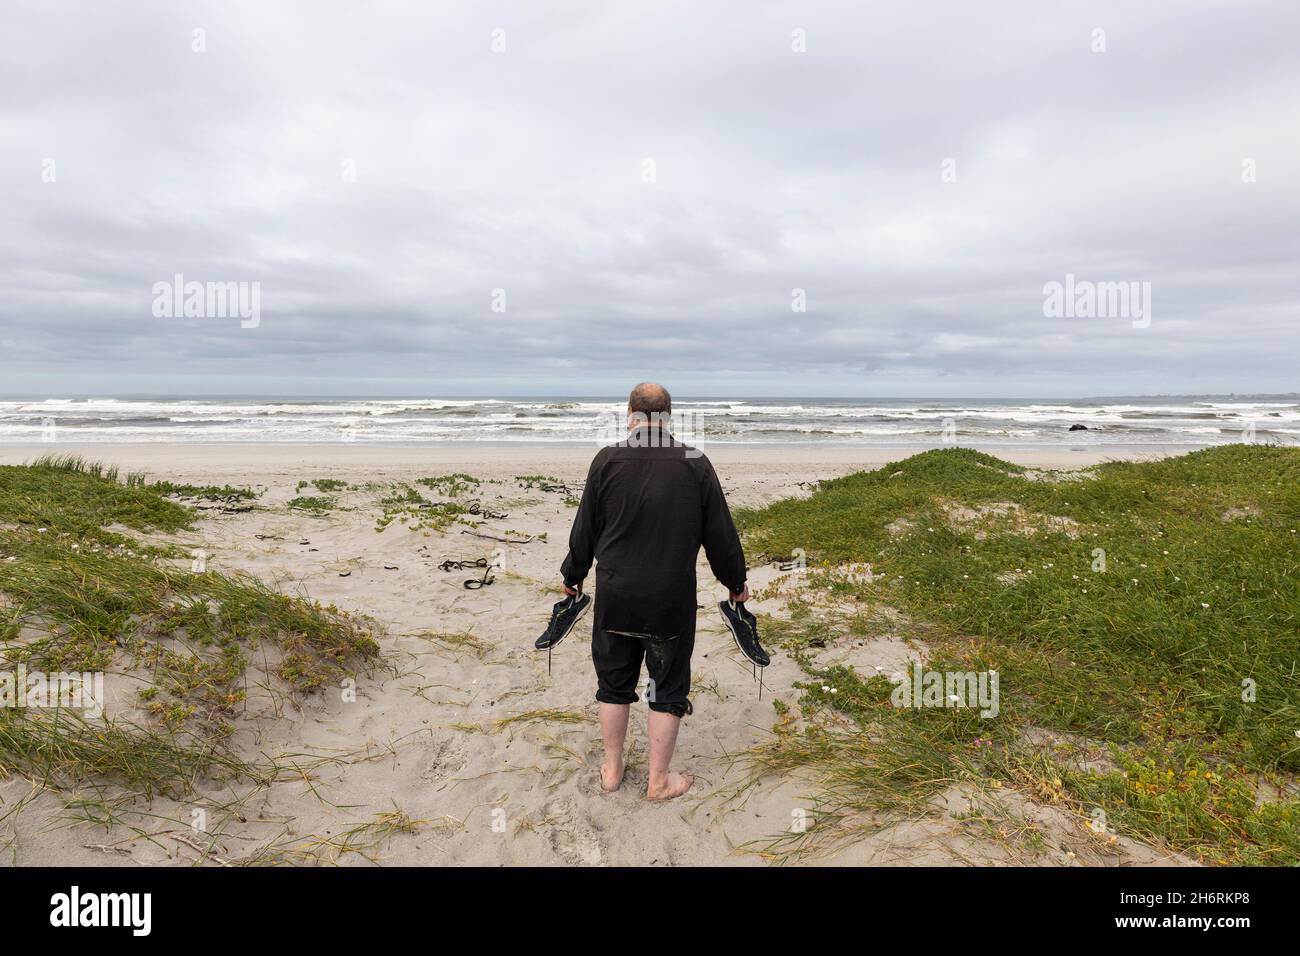 A mature man walking across a beach carrying his shoes in his hand Stock Photo